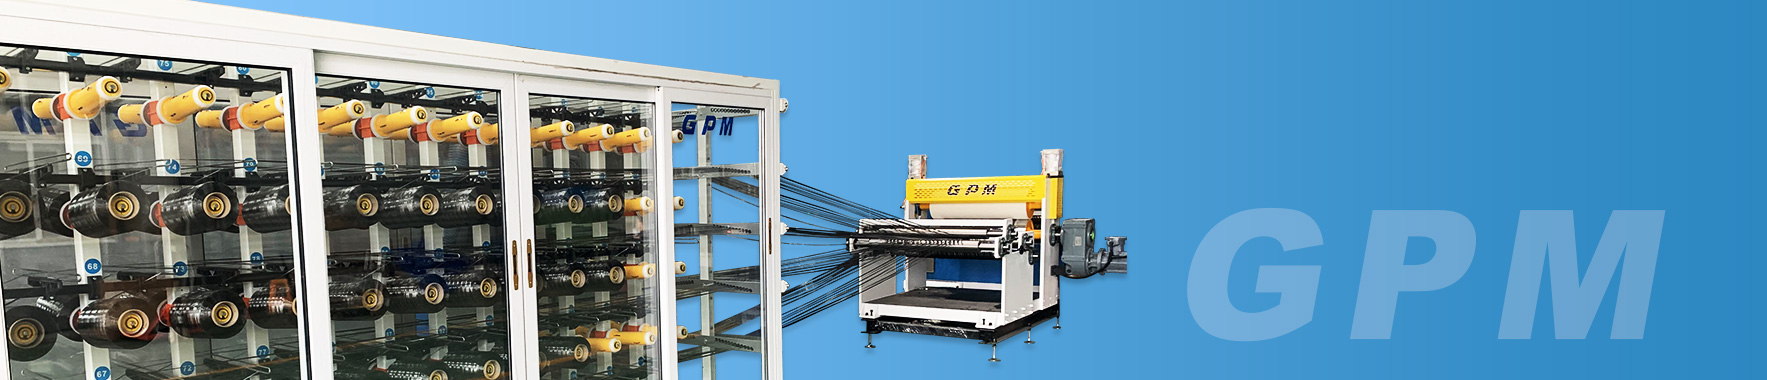 Shearing Unit For Continuous Fiber Reinforced Thermoplastic Composite Sheets /UD Tapes Prepreg ;